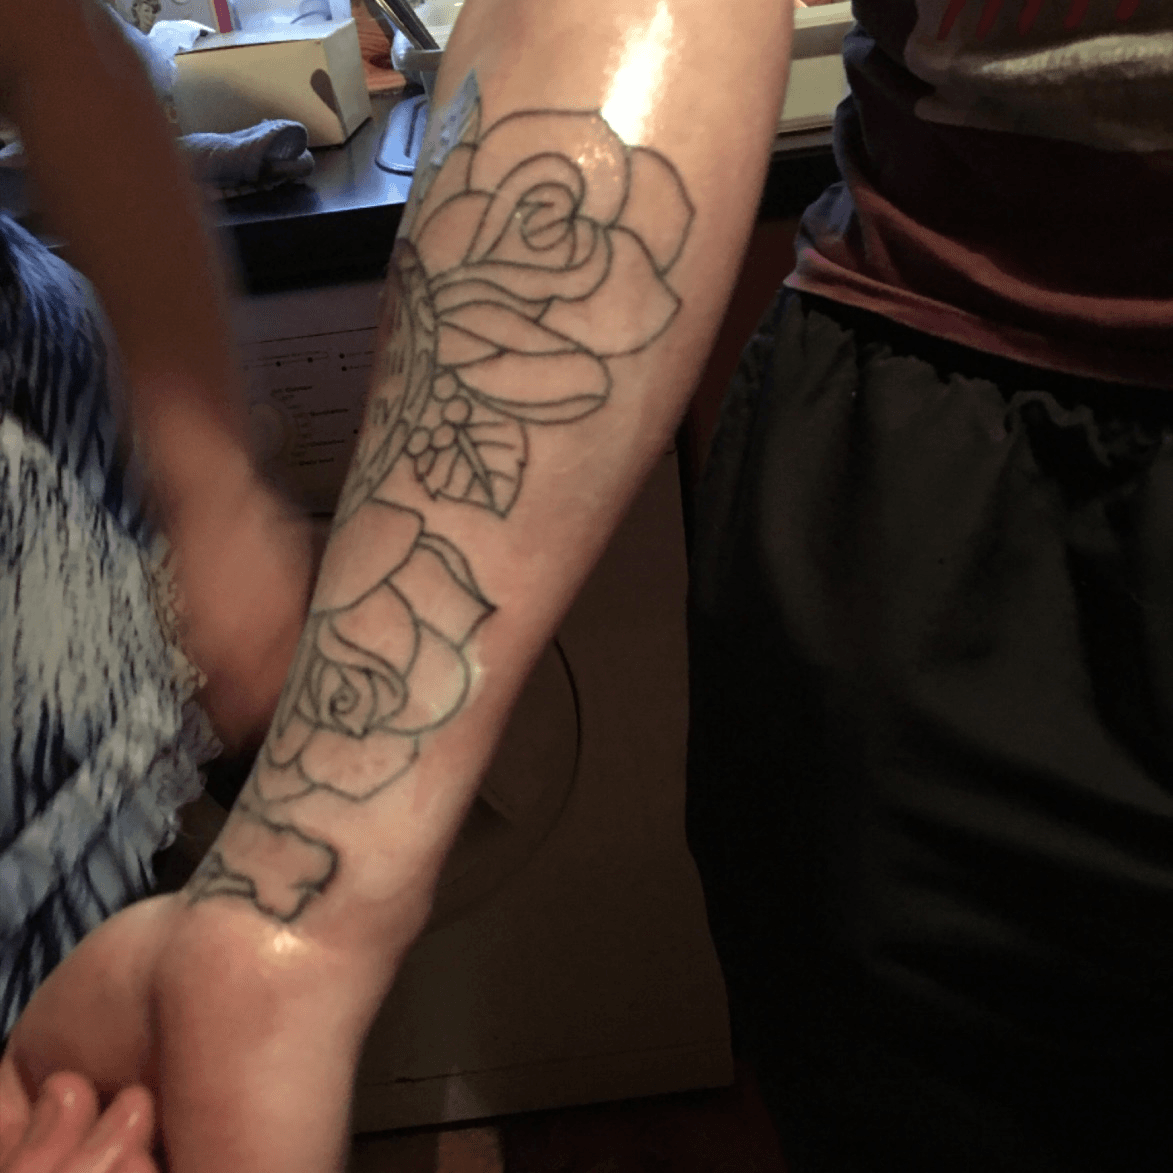 Tattoo uploaded by nay1995 • Outline to finish the sleeve #tattoo #sleeve  #linework #forearm #Memory #memorial #newink #outline #clock #roeses #rose  • Tattoodo